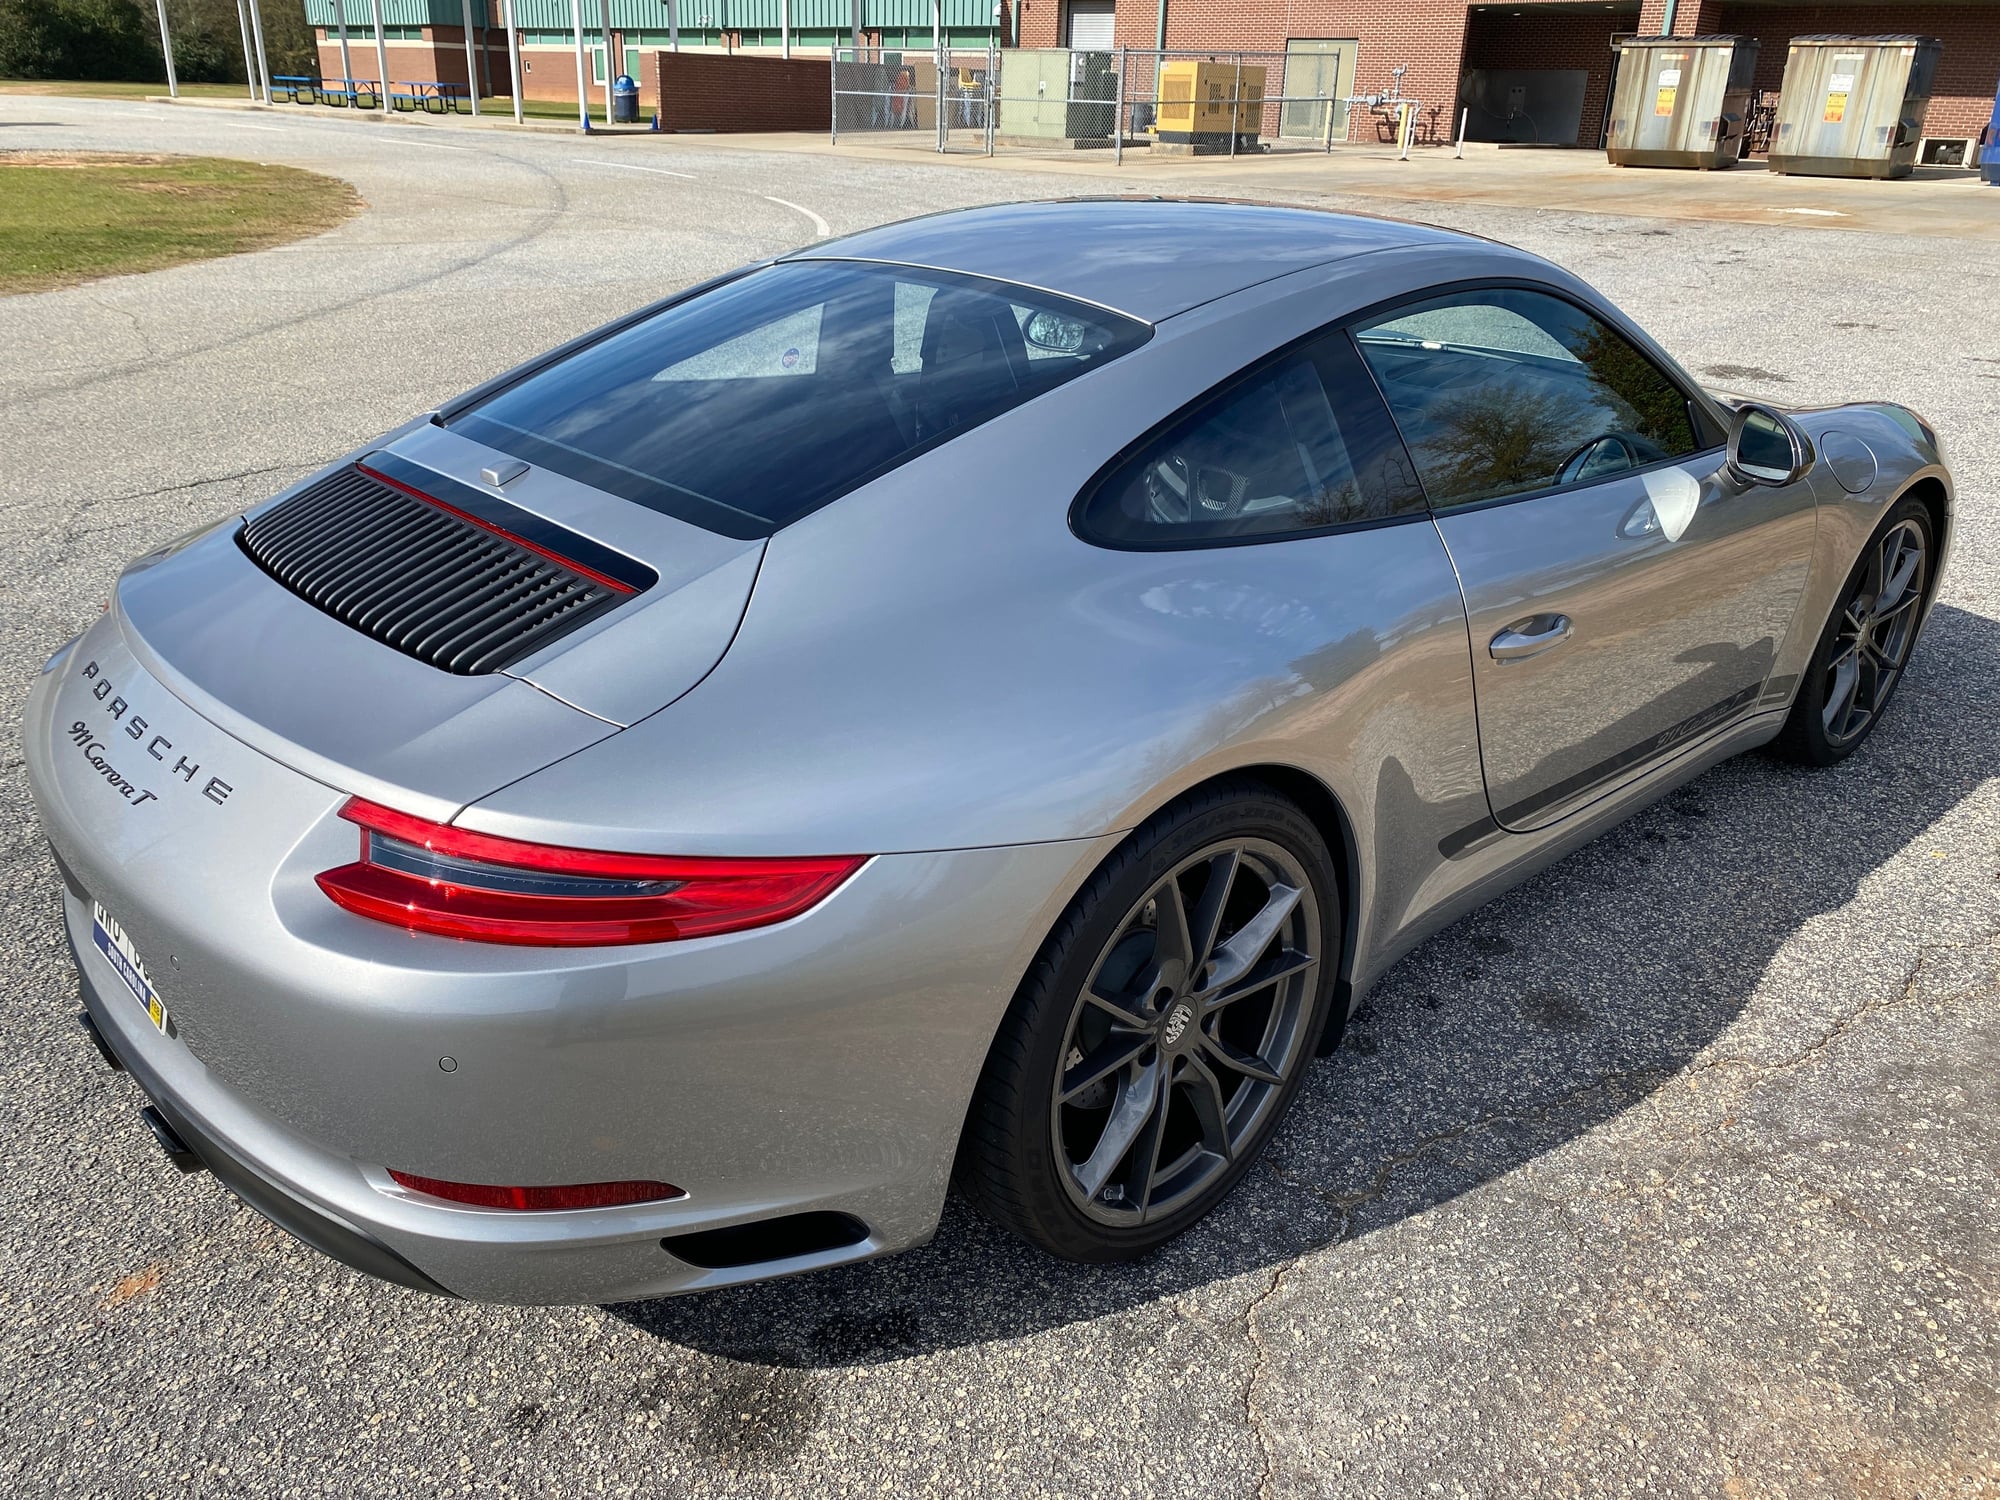 2018 Porsche 911 - 2018 Carrera T, MANUAL, 11.5k miles, GT Silver, carbon buckets, slicktop, no mods - Used - VIN WP0AA2A92JS106269 - 11,500 Miles - 6 cyl - 2WD - Manual - Coupe - Silver - Simpsonville, SC 29680, United States